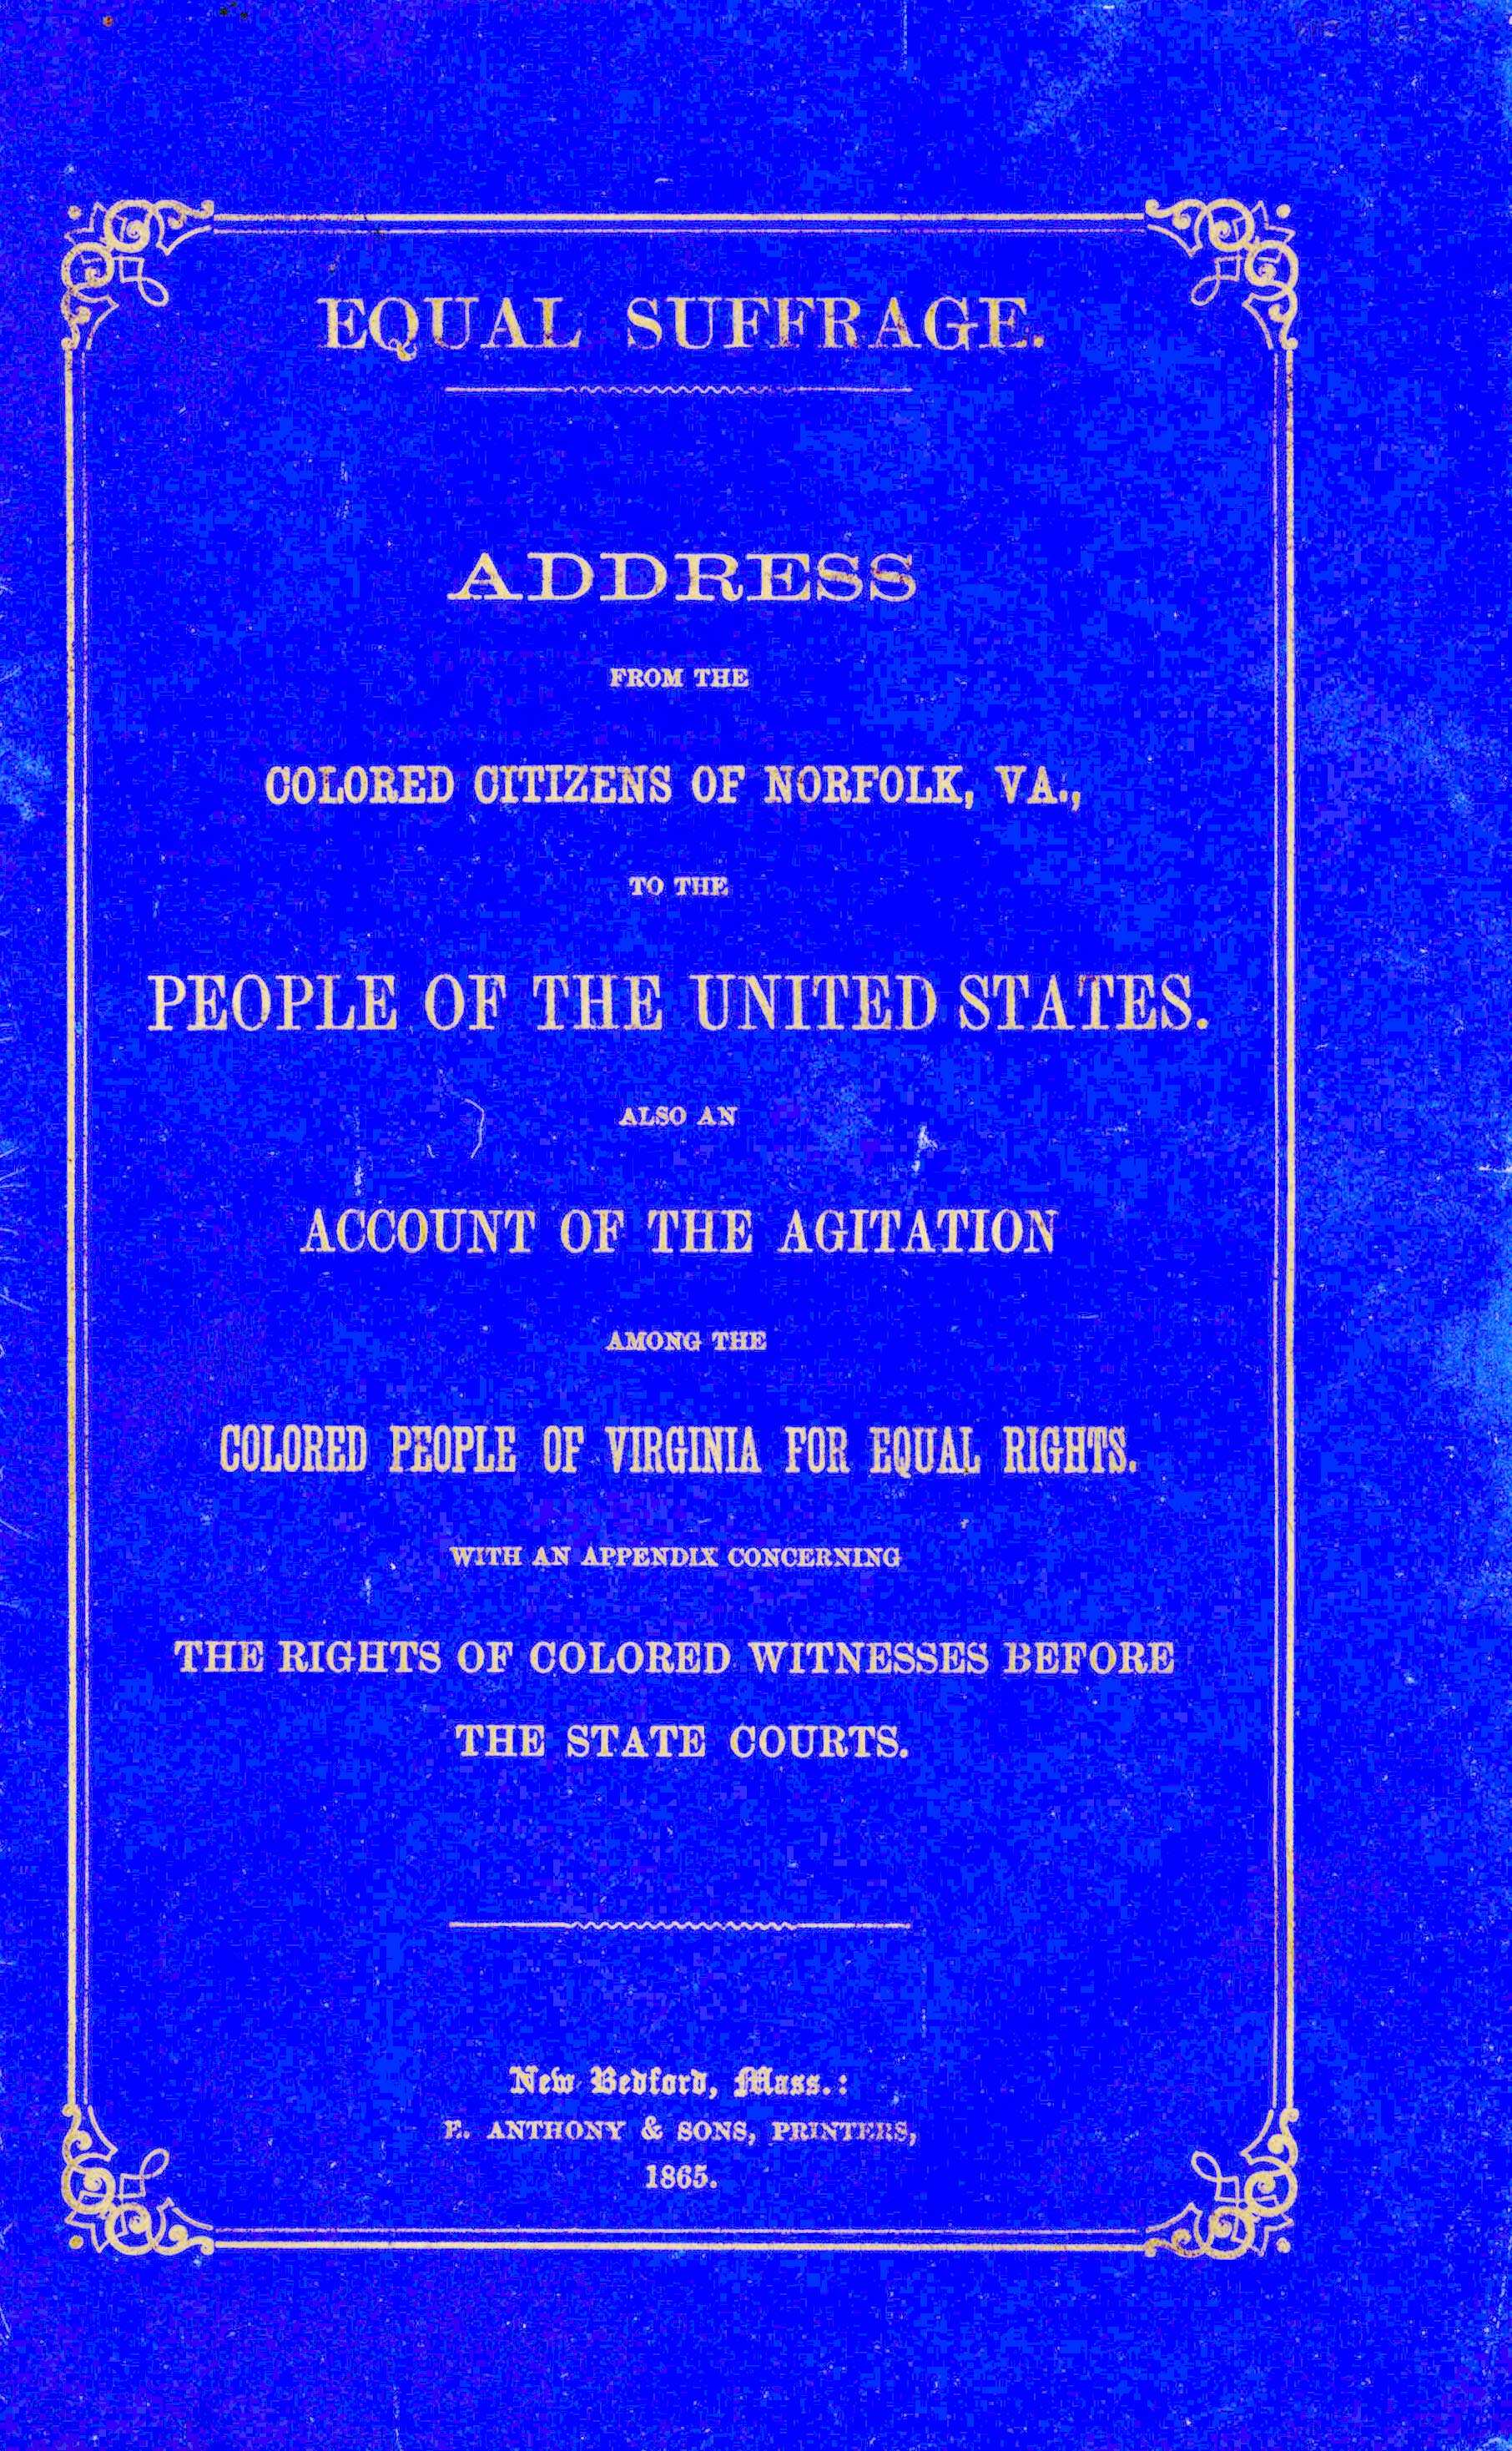 A bright blue cover for the Equal Suffrage address. The font is inclosed by a decorative outlined.